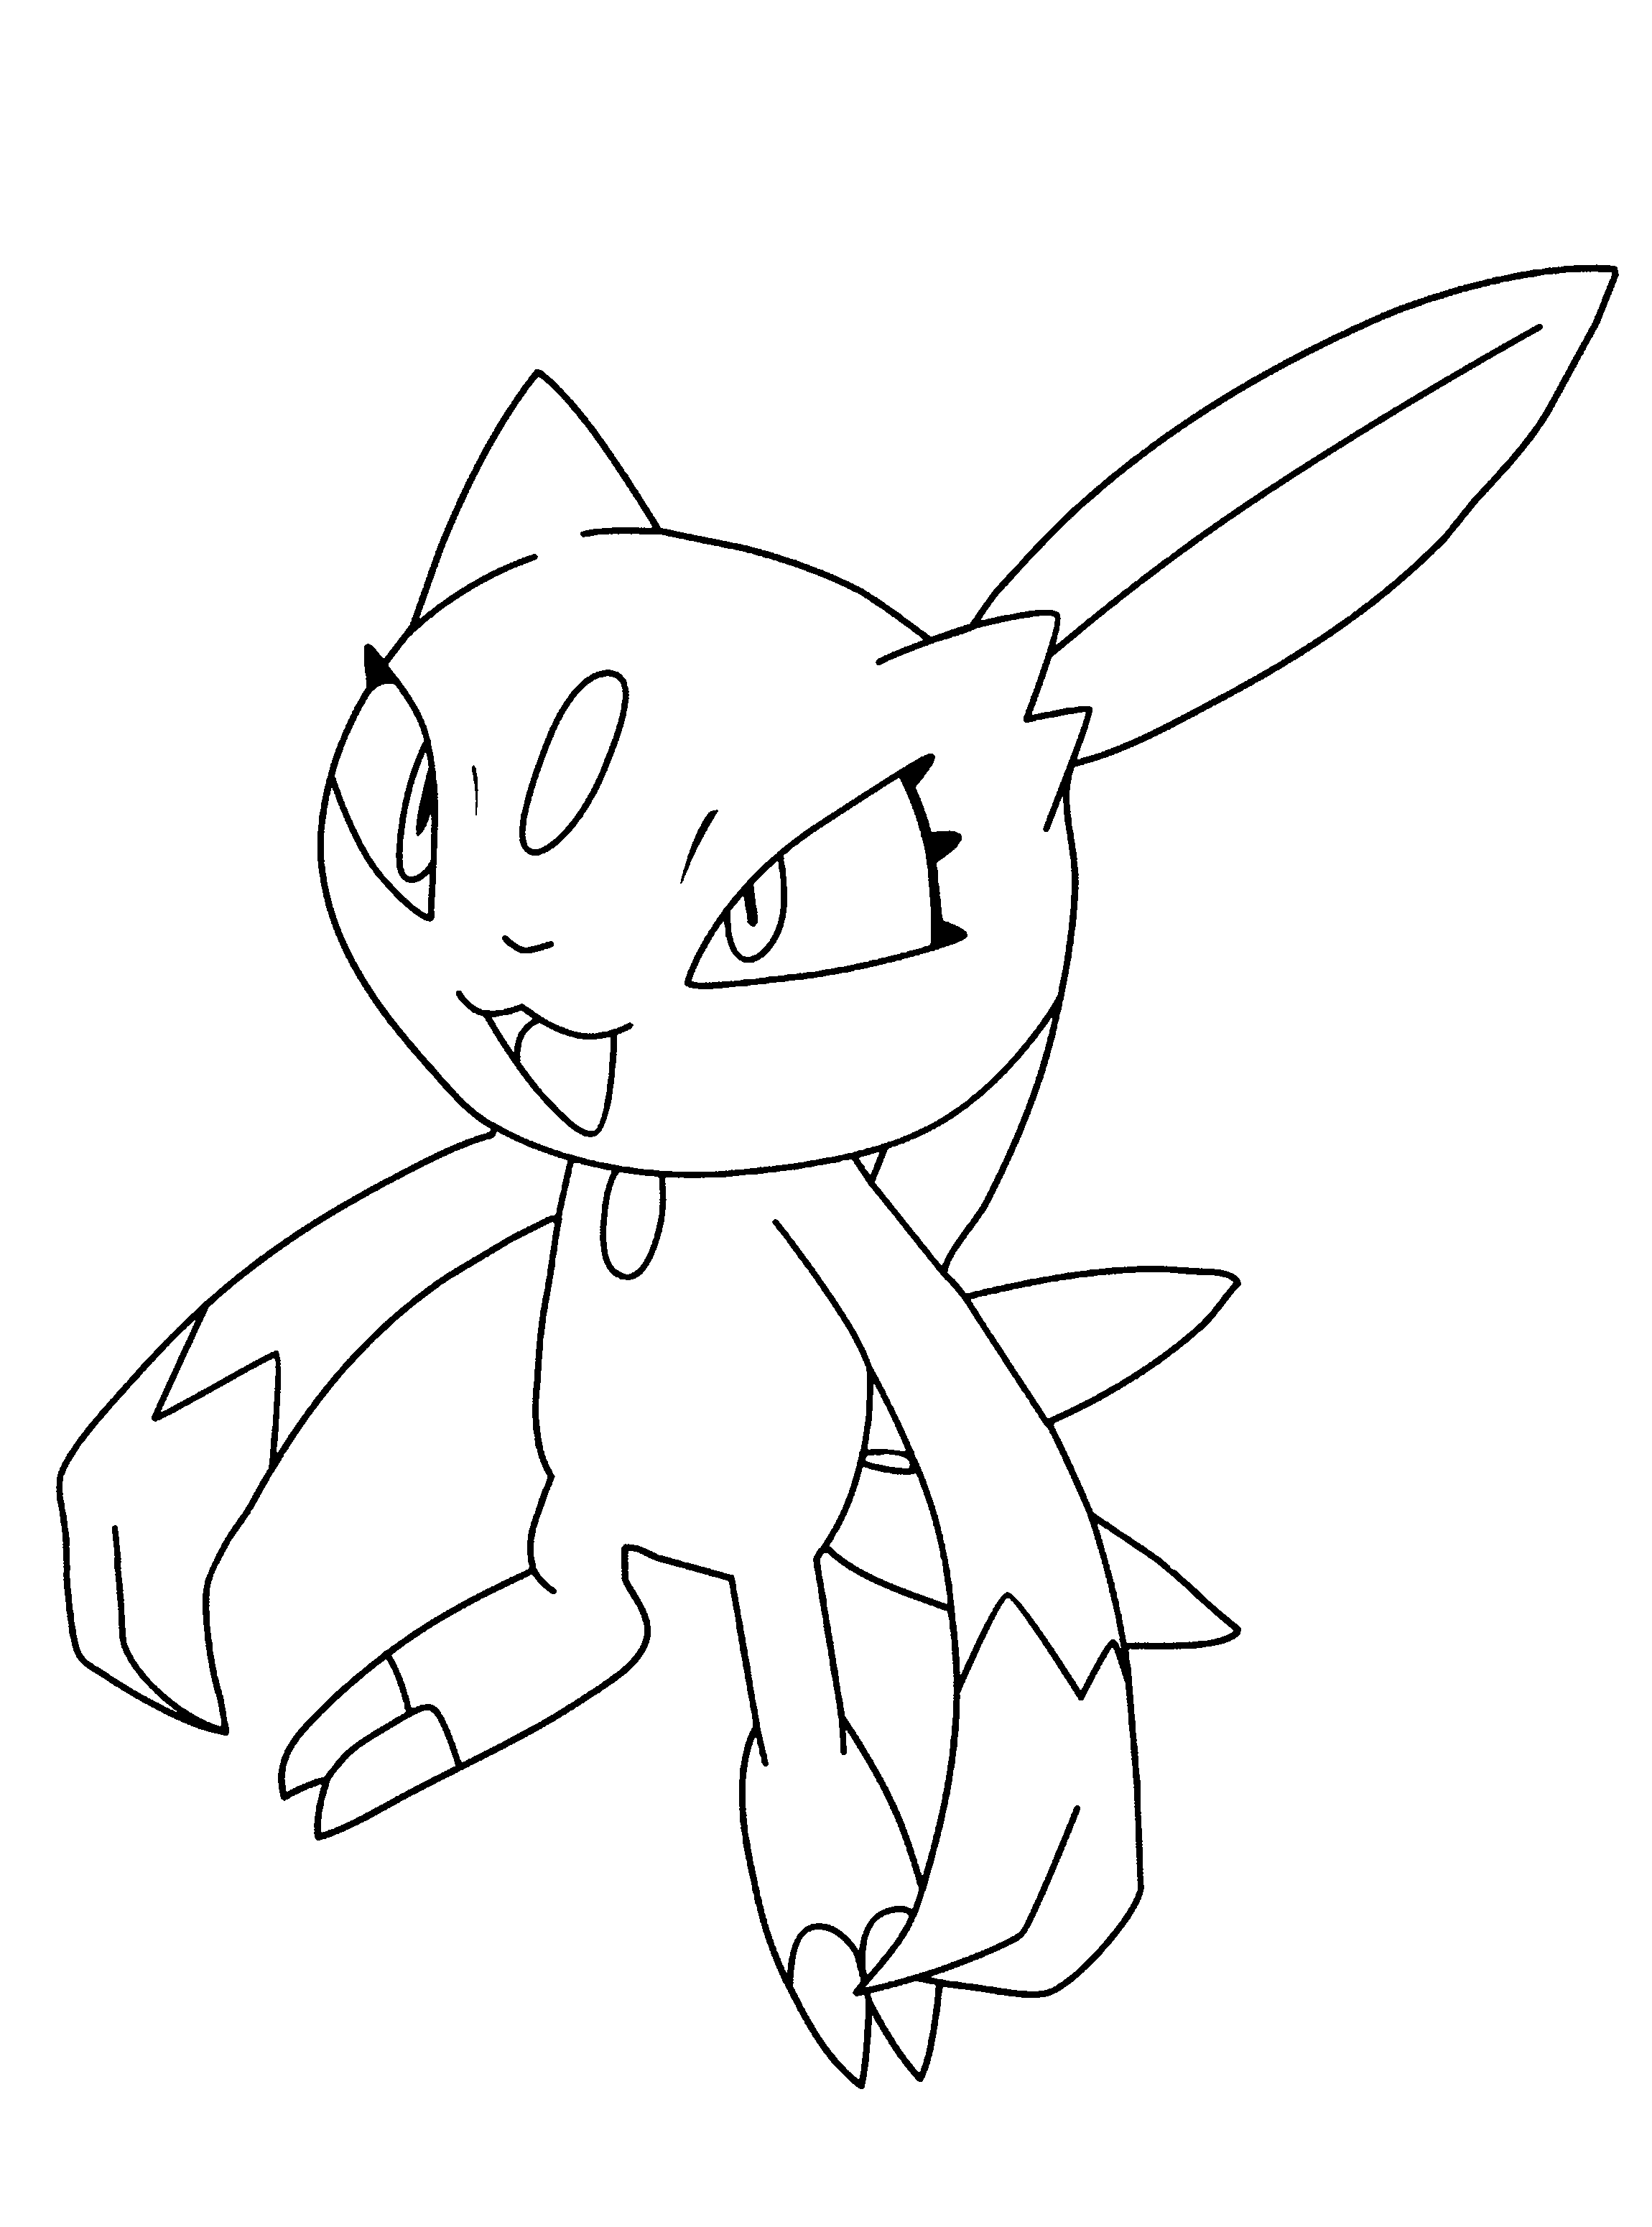 Sneasel Pokemon coloring page